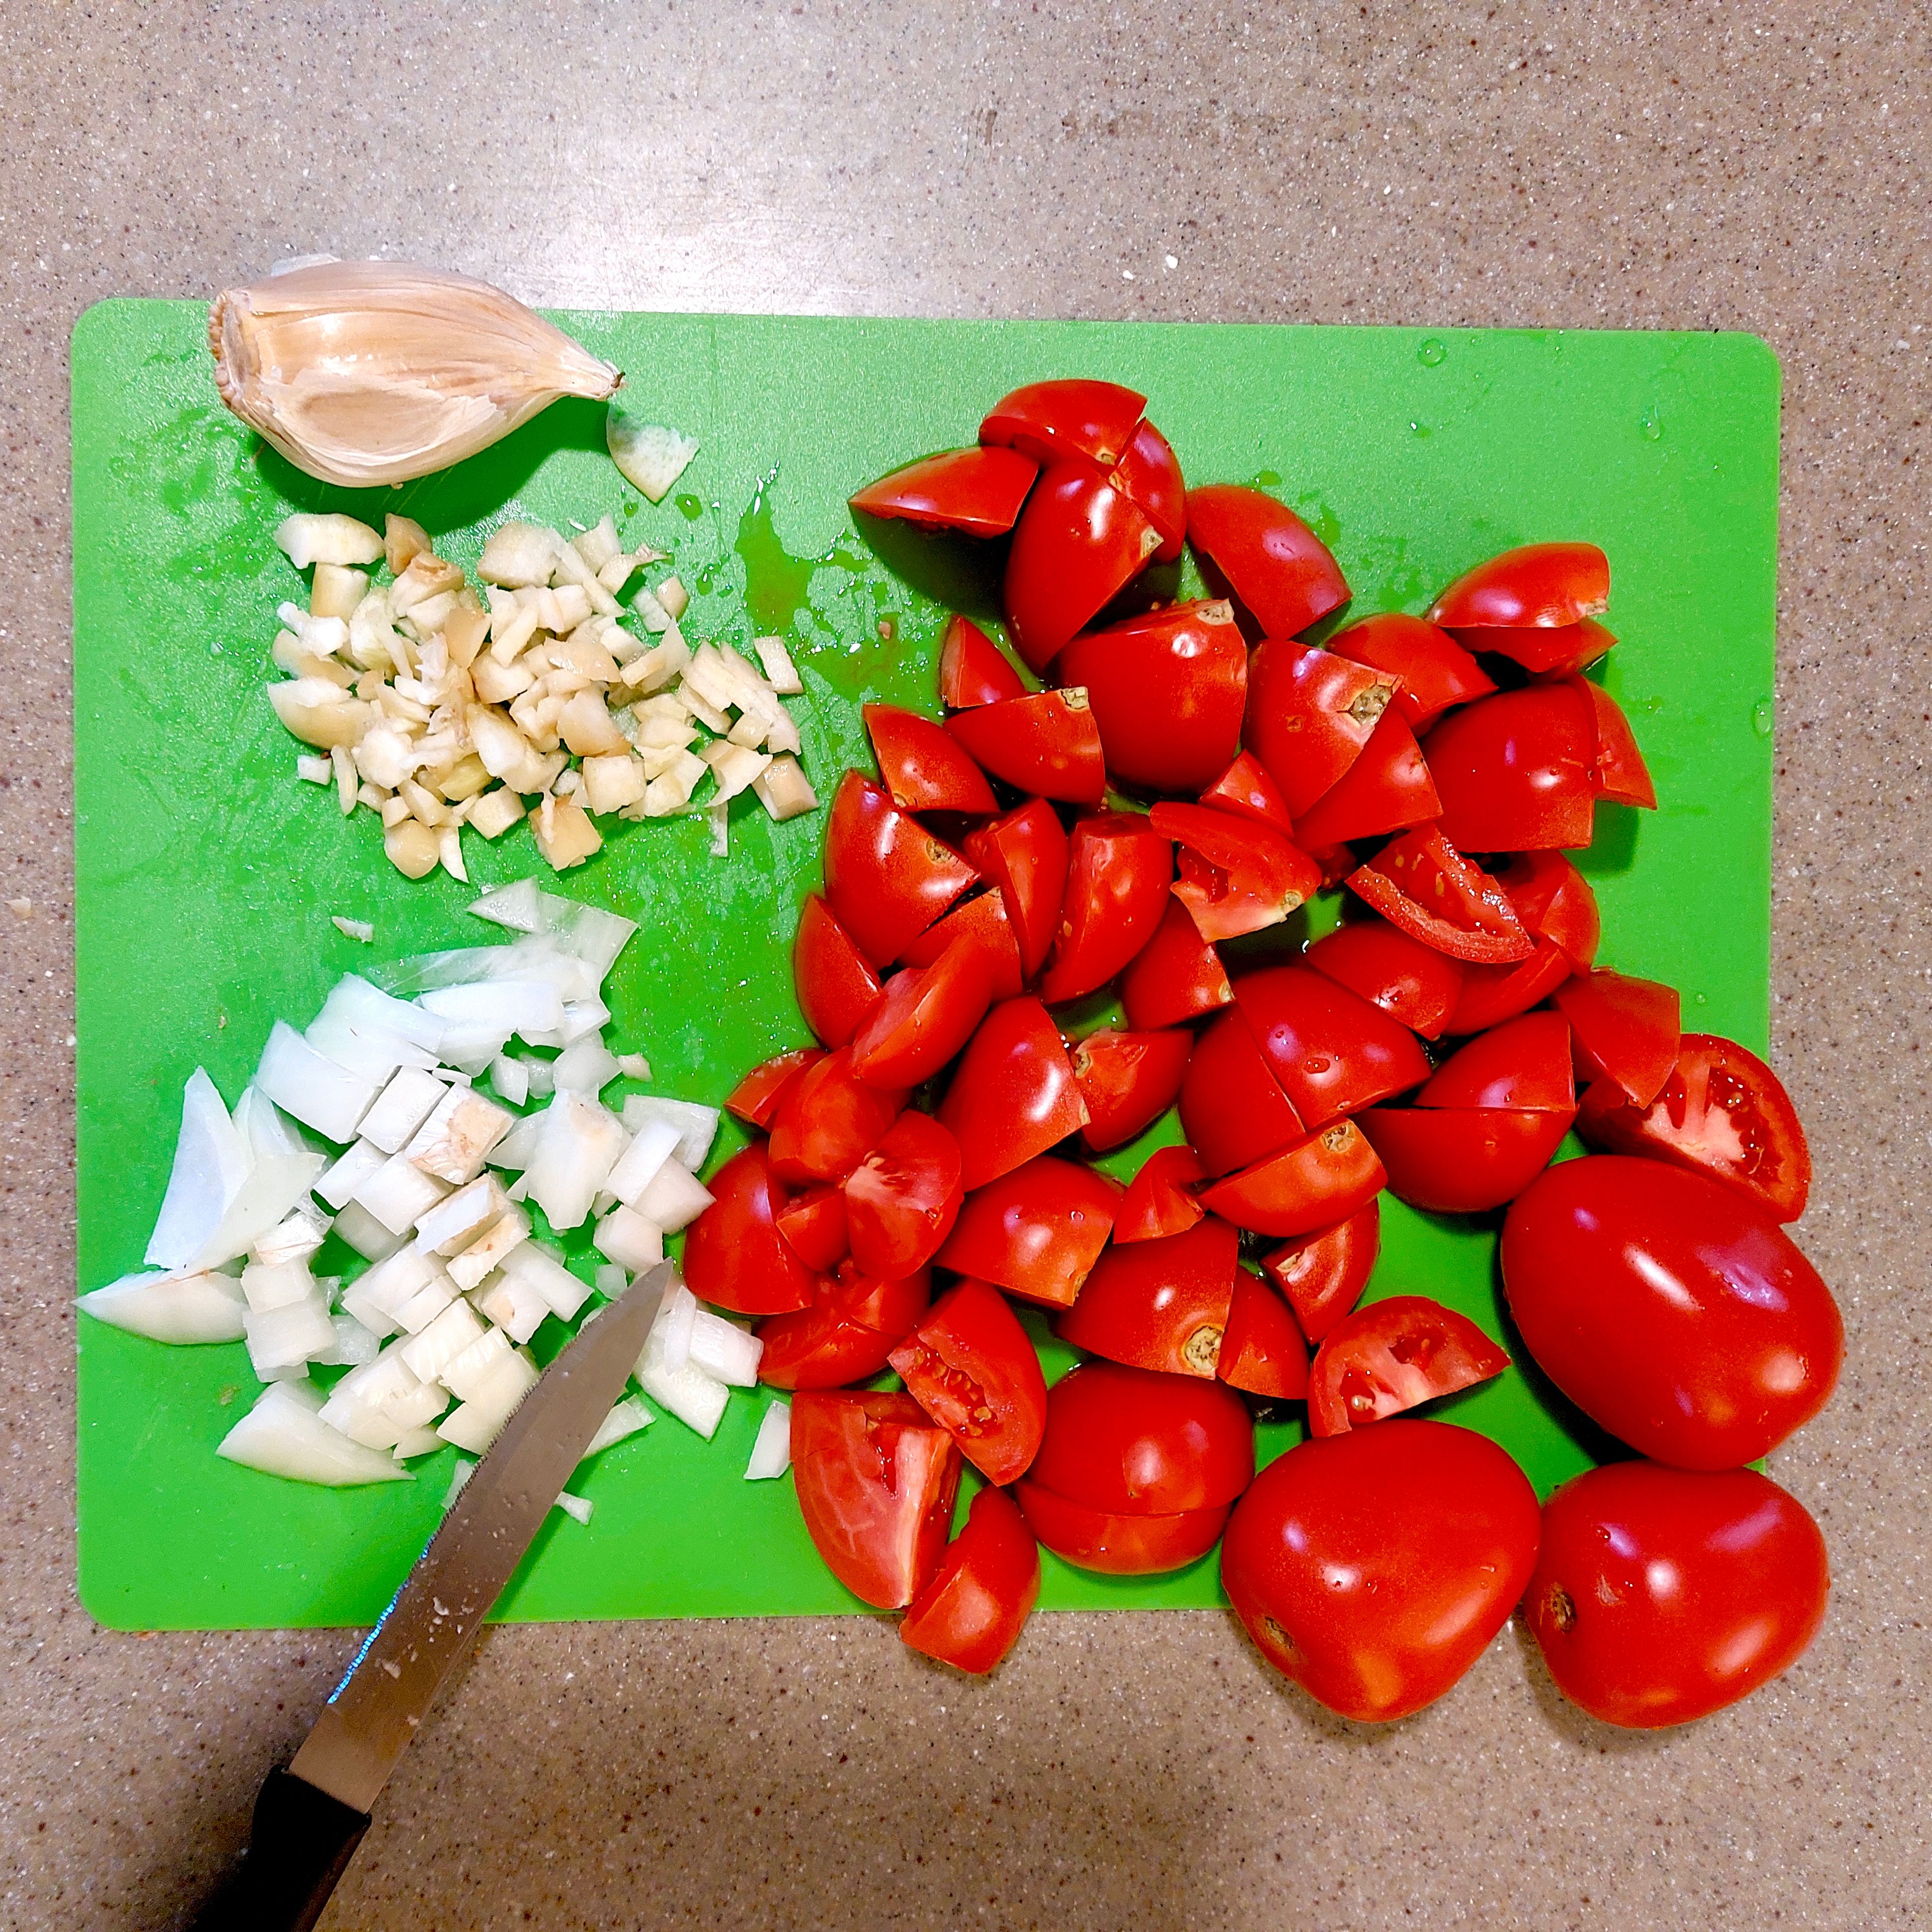 Wash the tomatoes and the serrano pepper with cold water. Cut the tomatoes, garlic cloves and onion into large pieces.